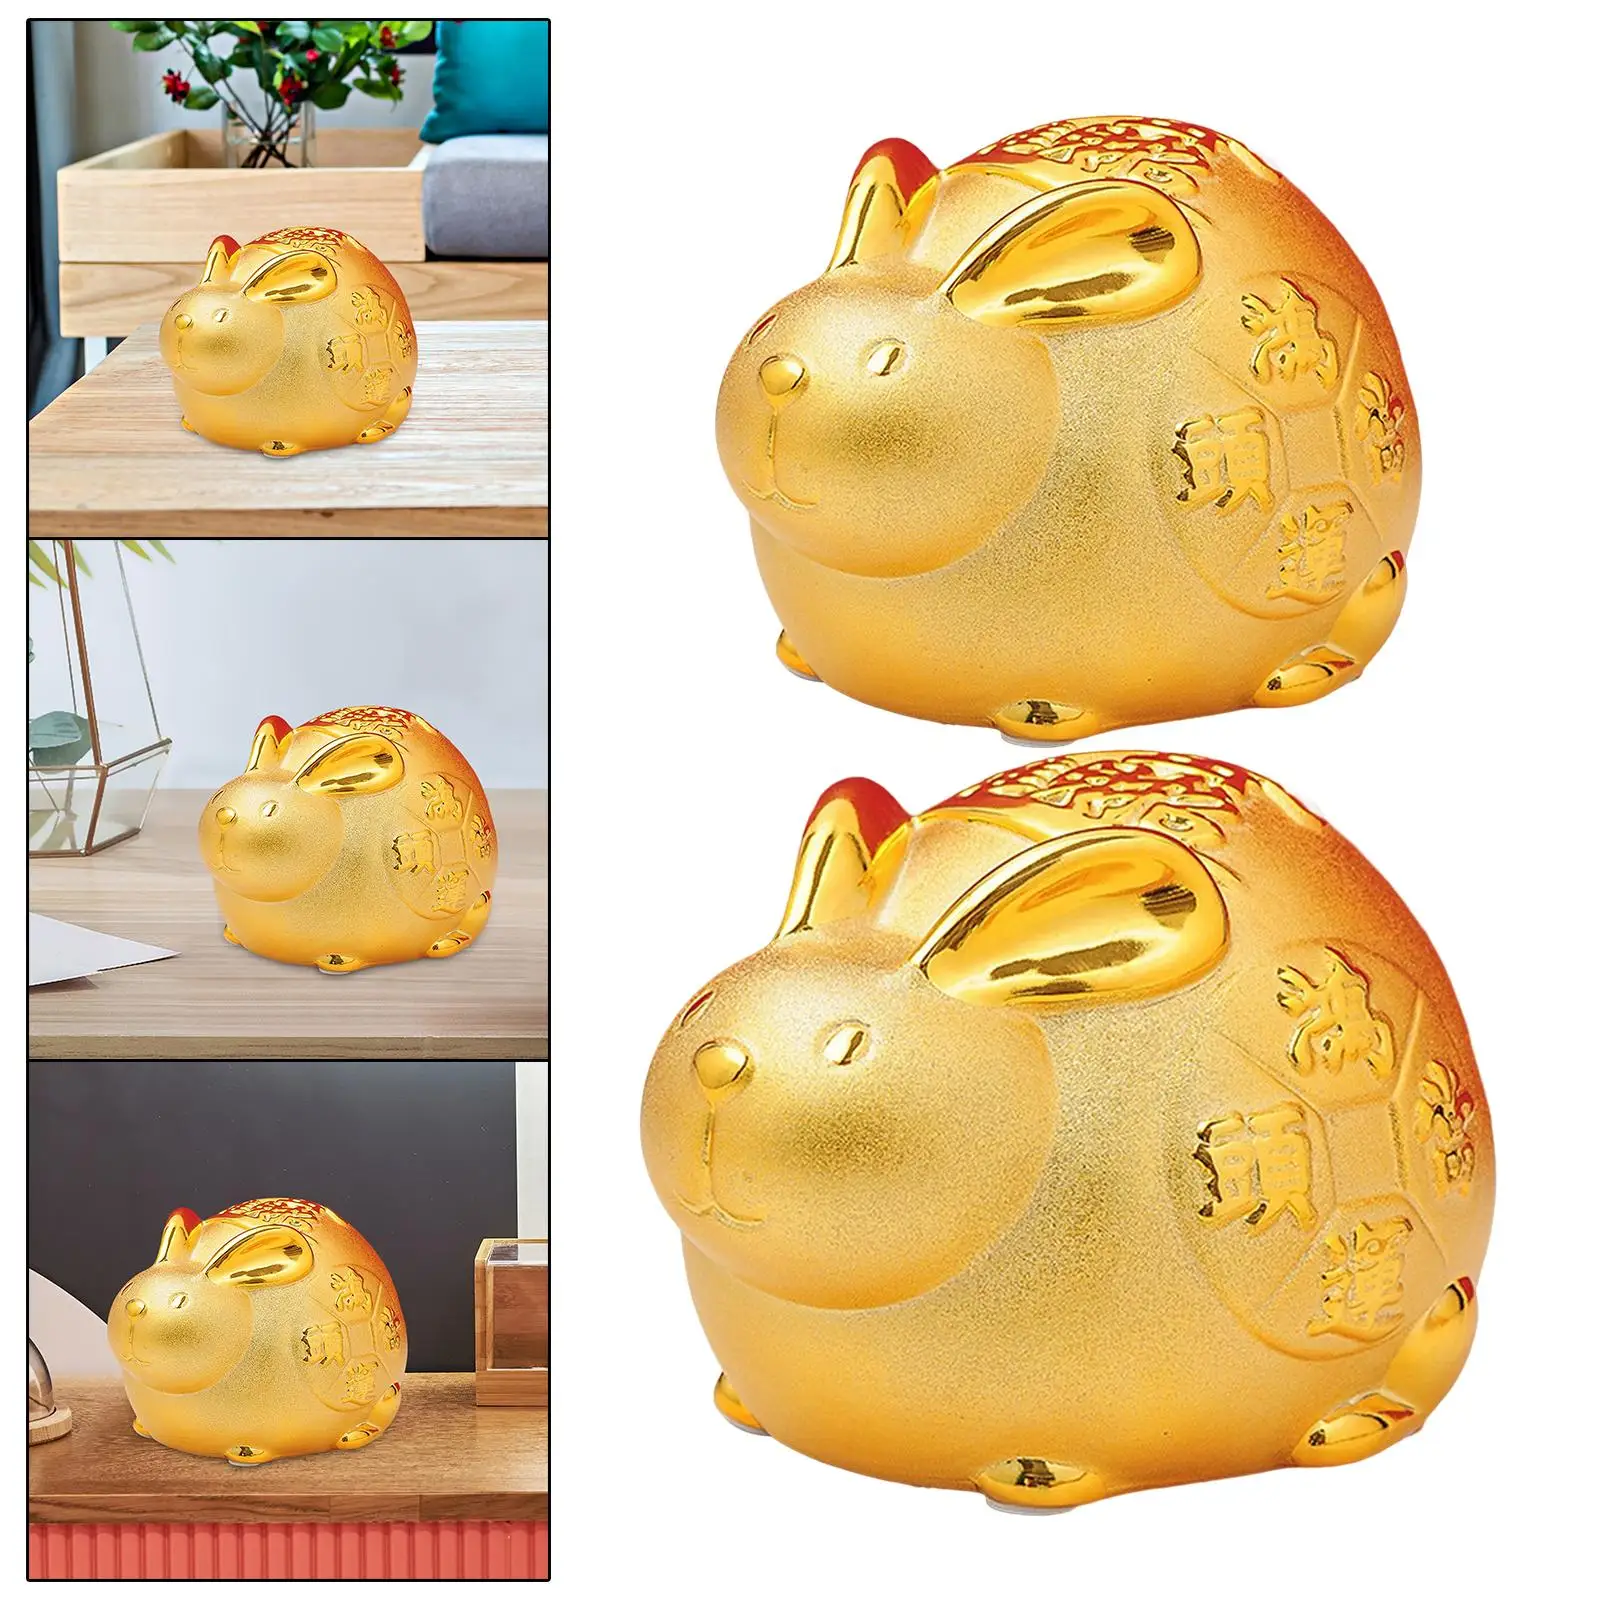 Lucky Rabbit Piggy Bank Bunny Figurine Money Saving Box Ornament Collectible Tabletop Statue for Home Decoration Easter Gifts